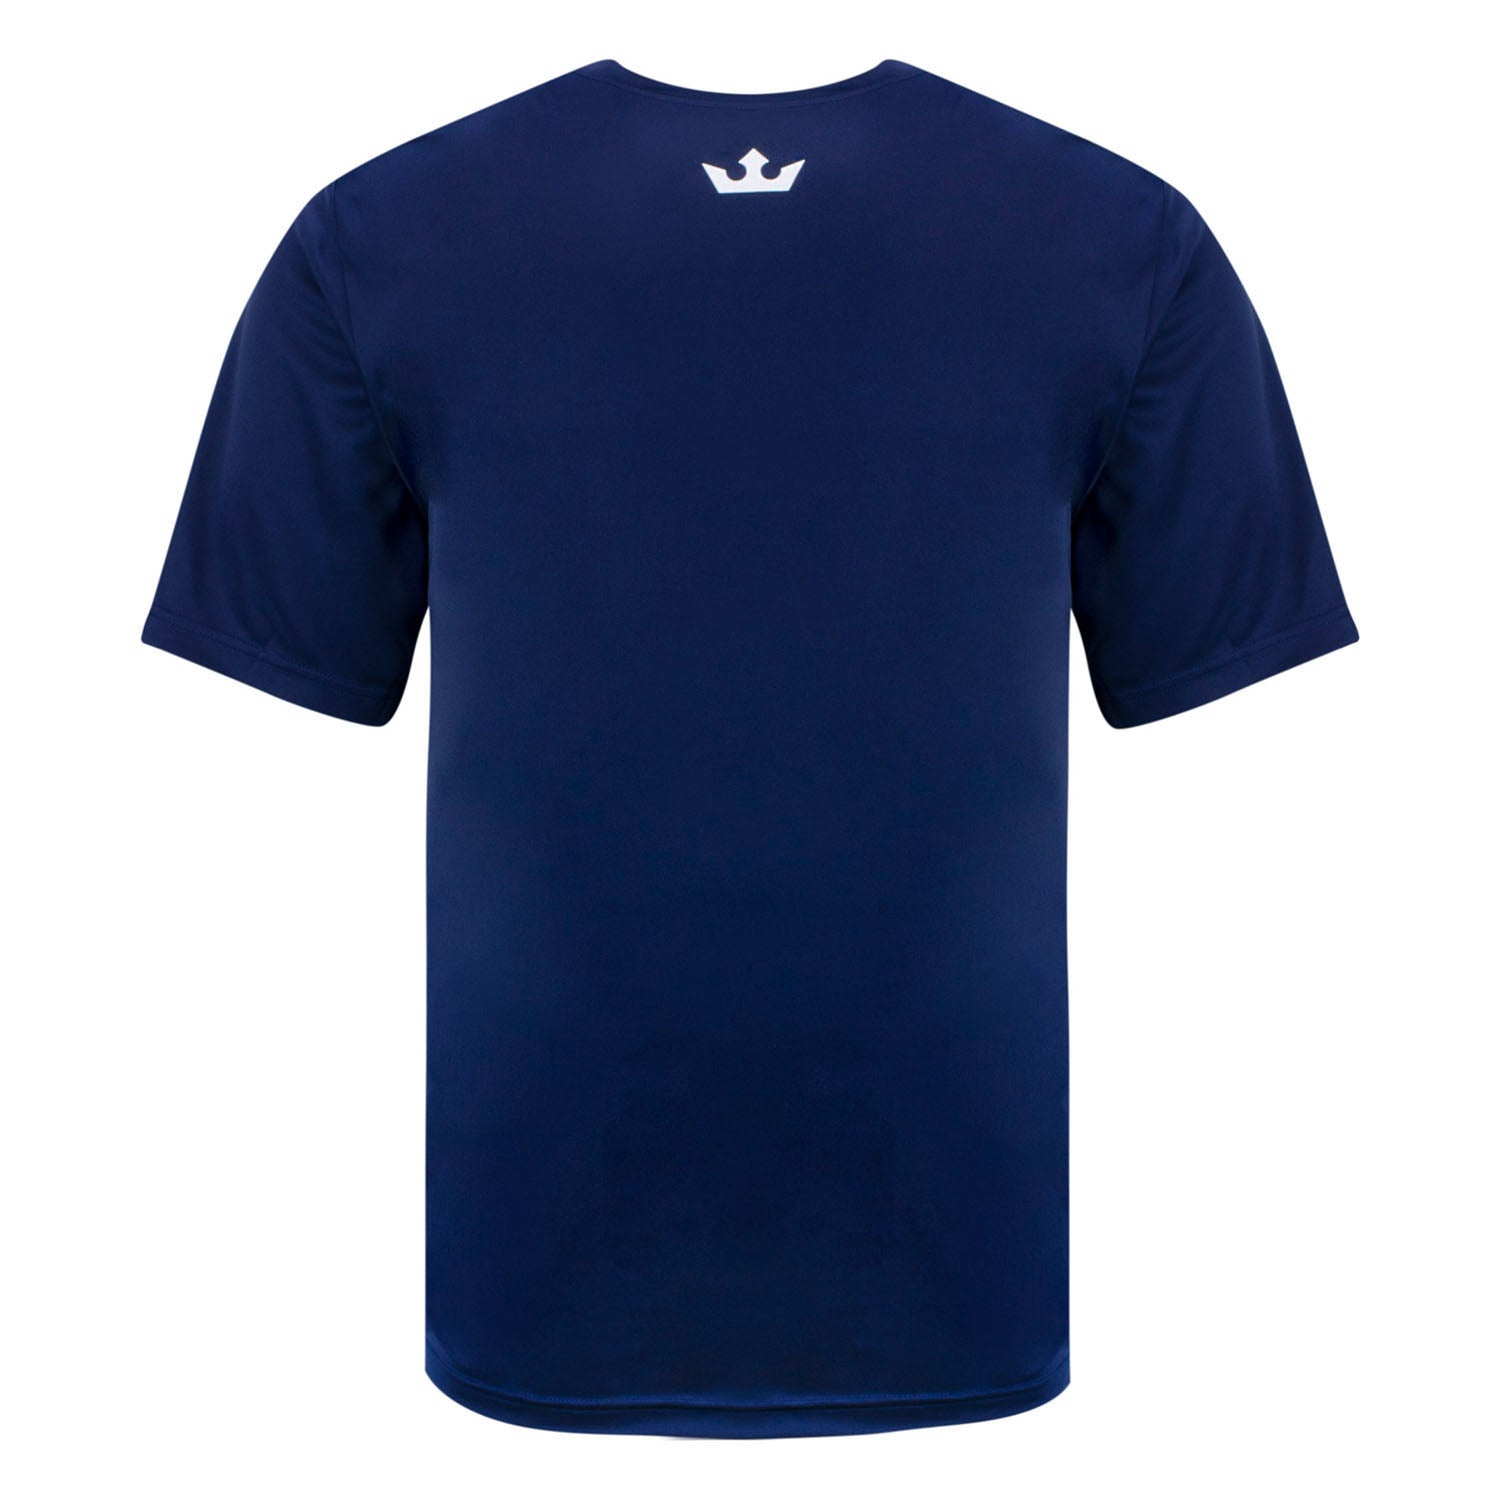 PFL Performance T-Shirt in Navy - Front View